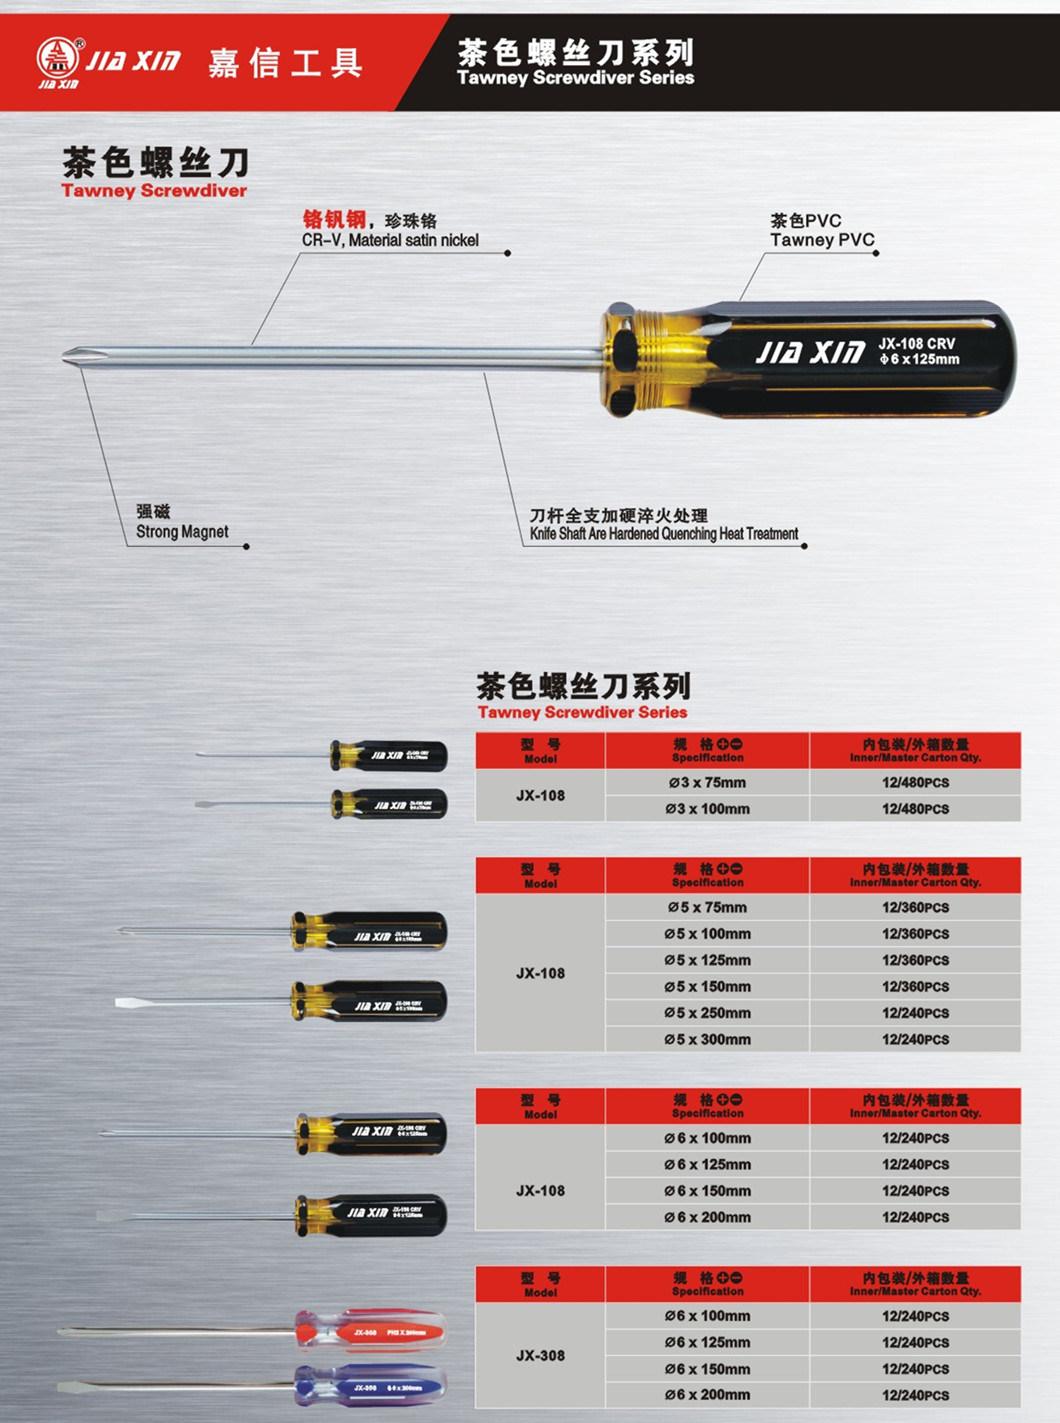 Multi-Specification High-Strength Torque Screwdriver, Used for Removing Screws